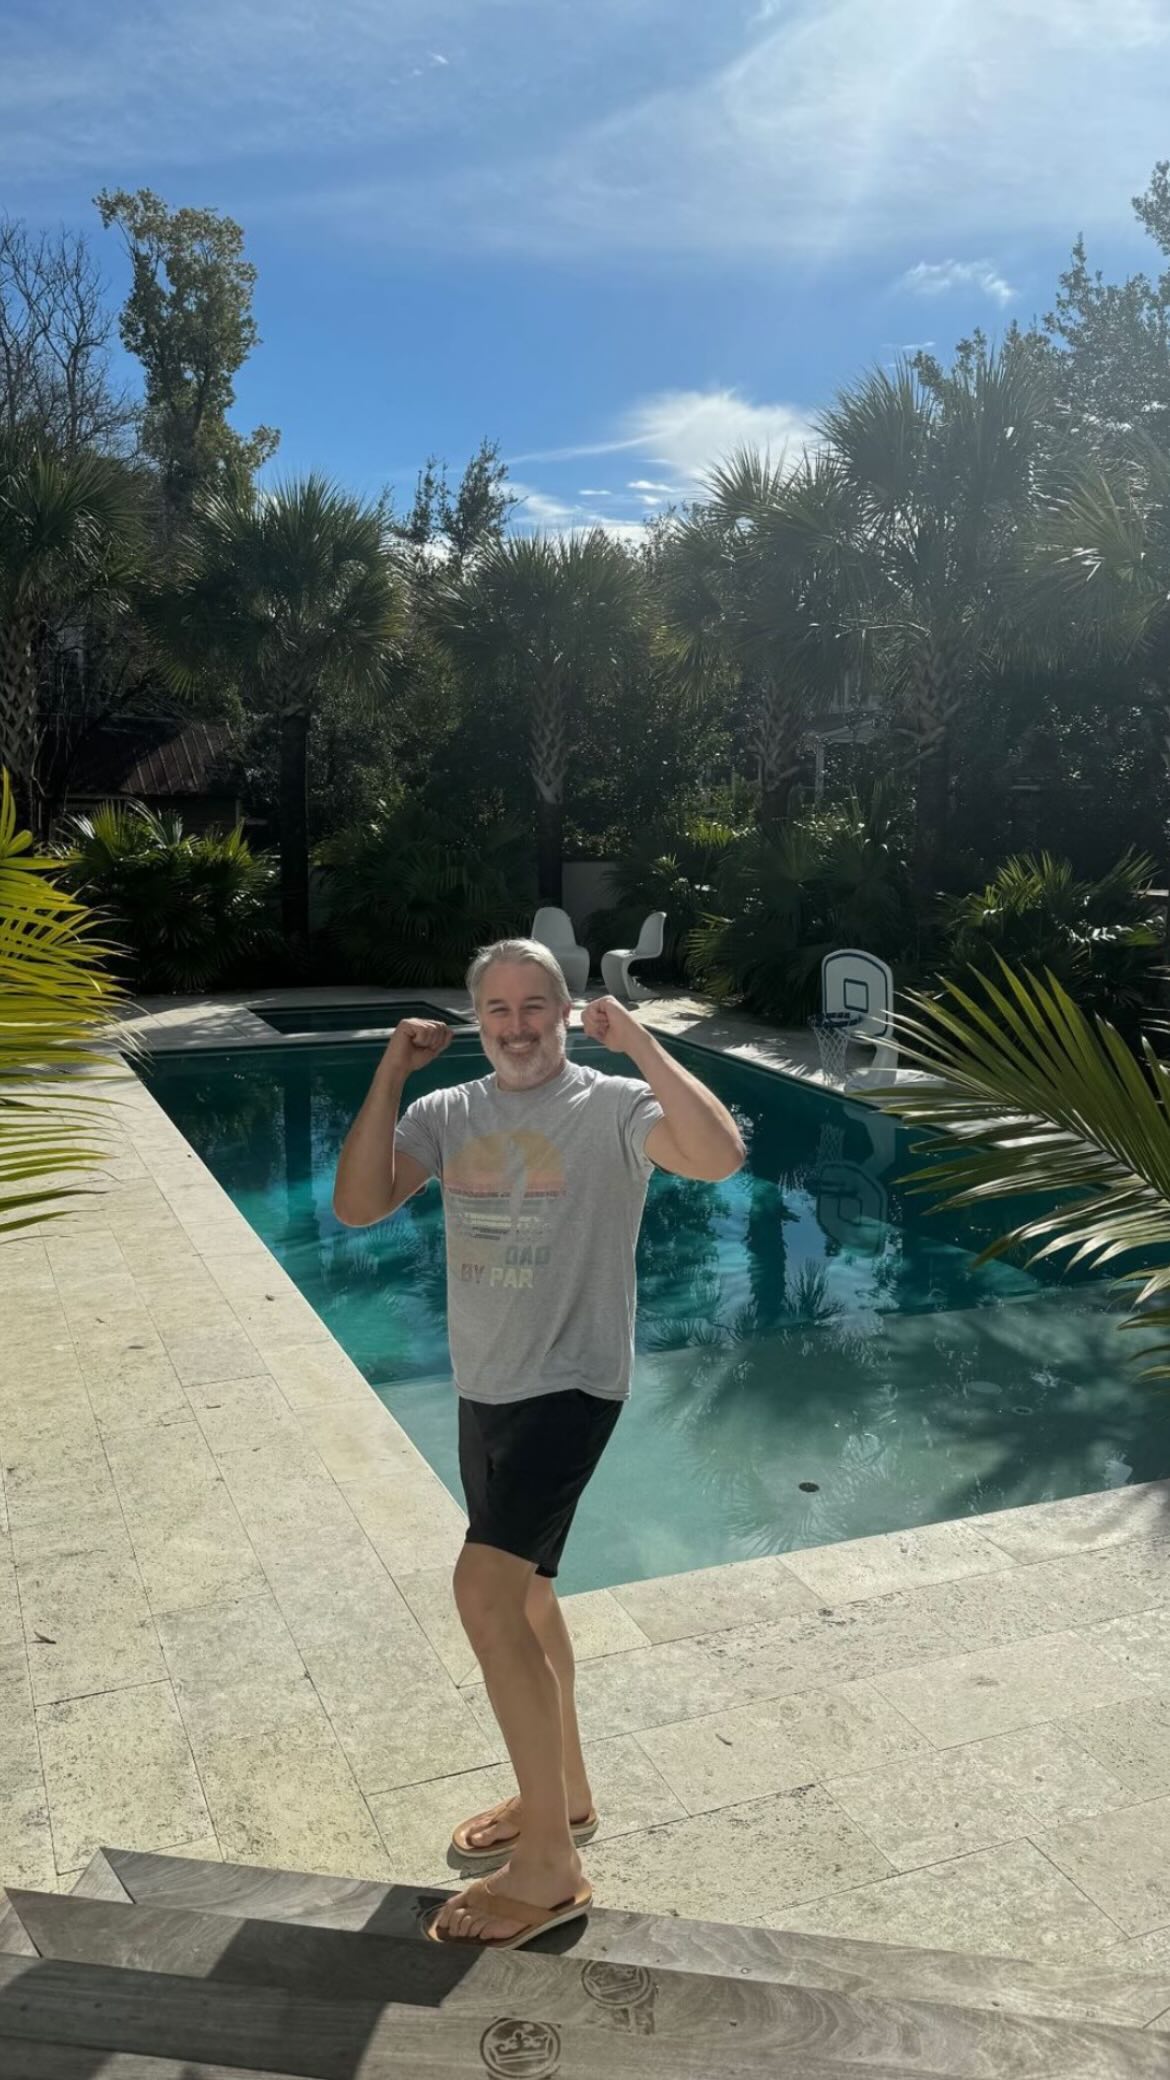 Tim was seen flexing on the steps of a pool on vacation in a T-shirt and black shorts